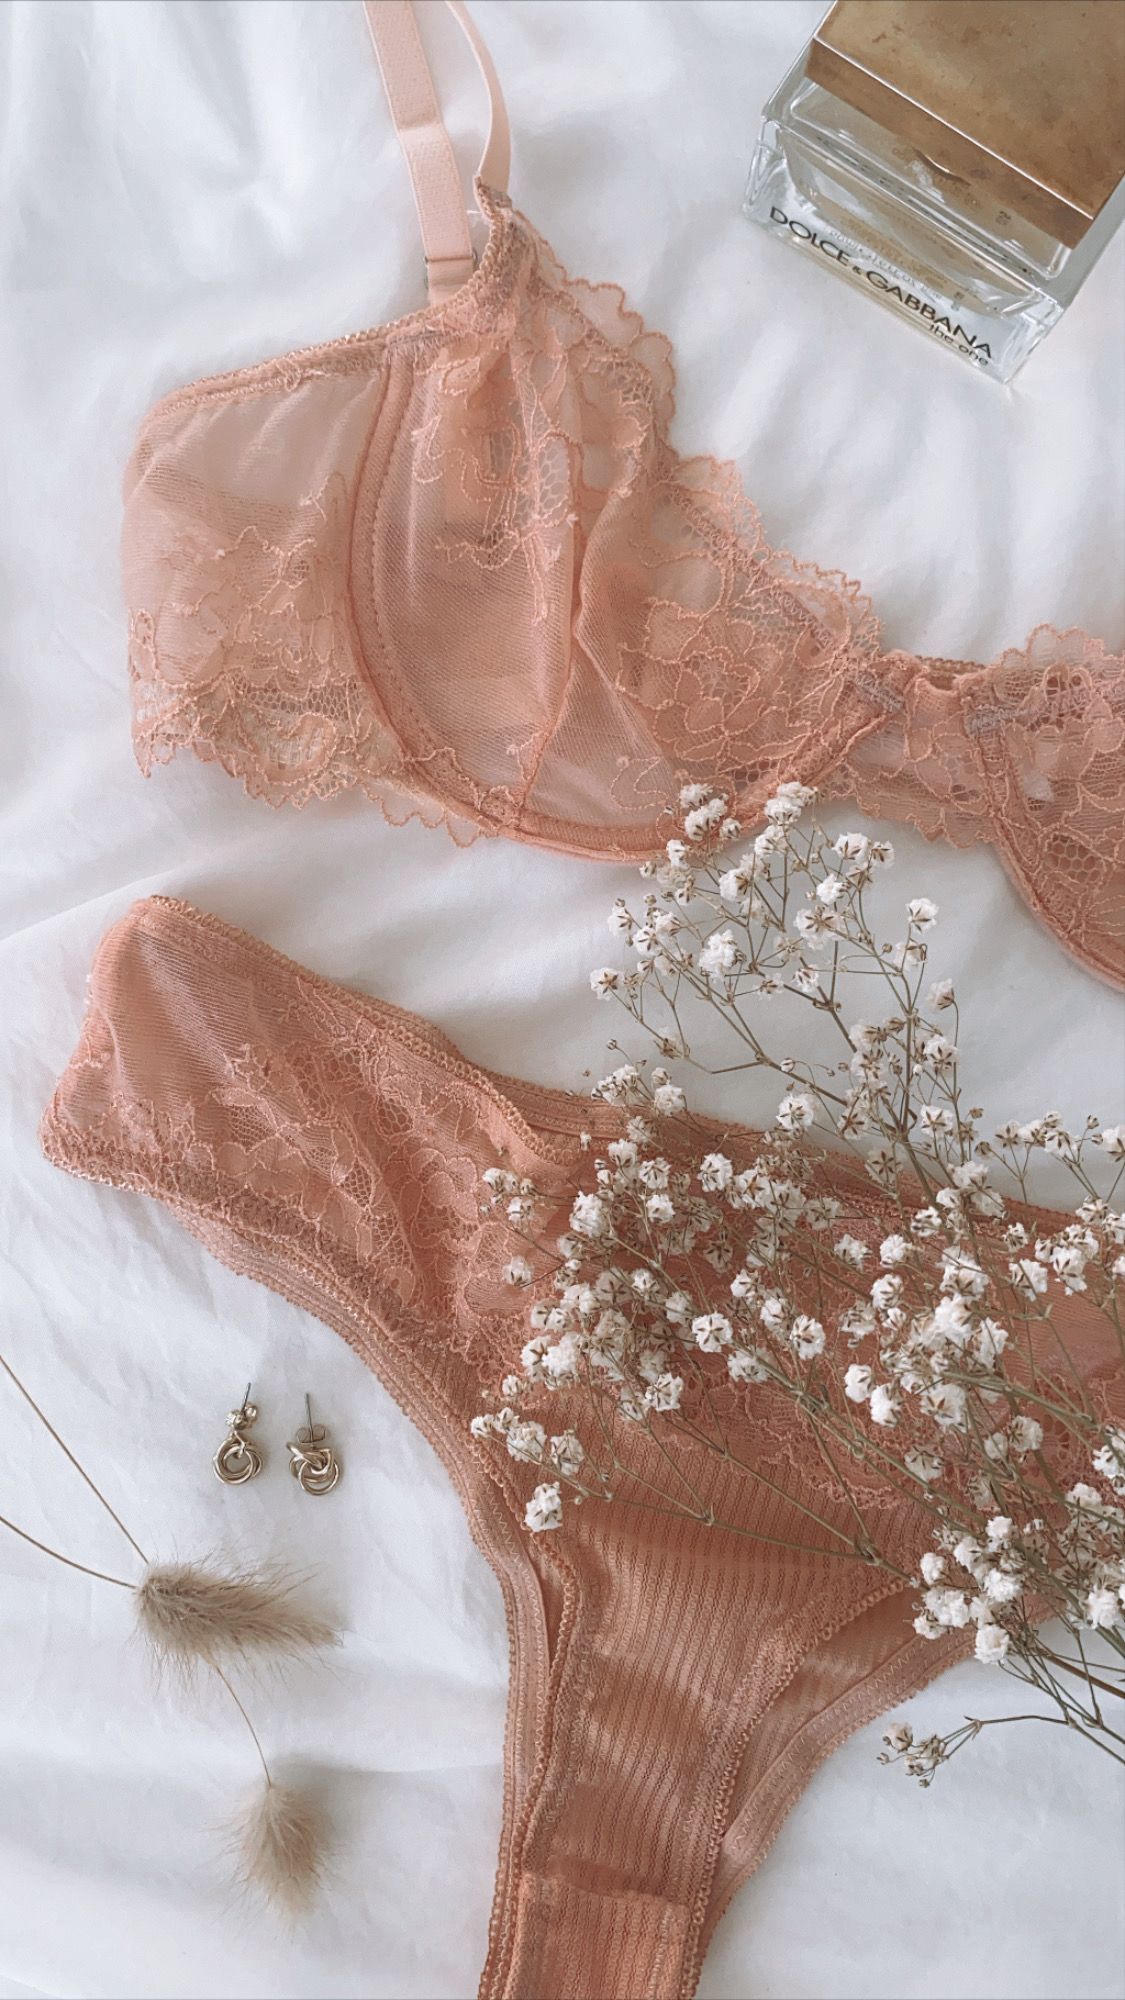 Comfortable and stylish lace lingerie